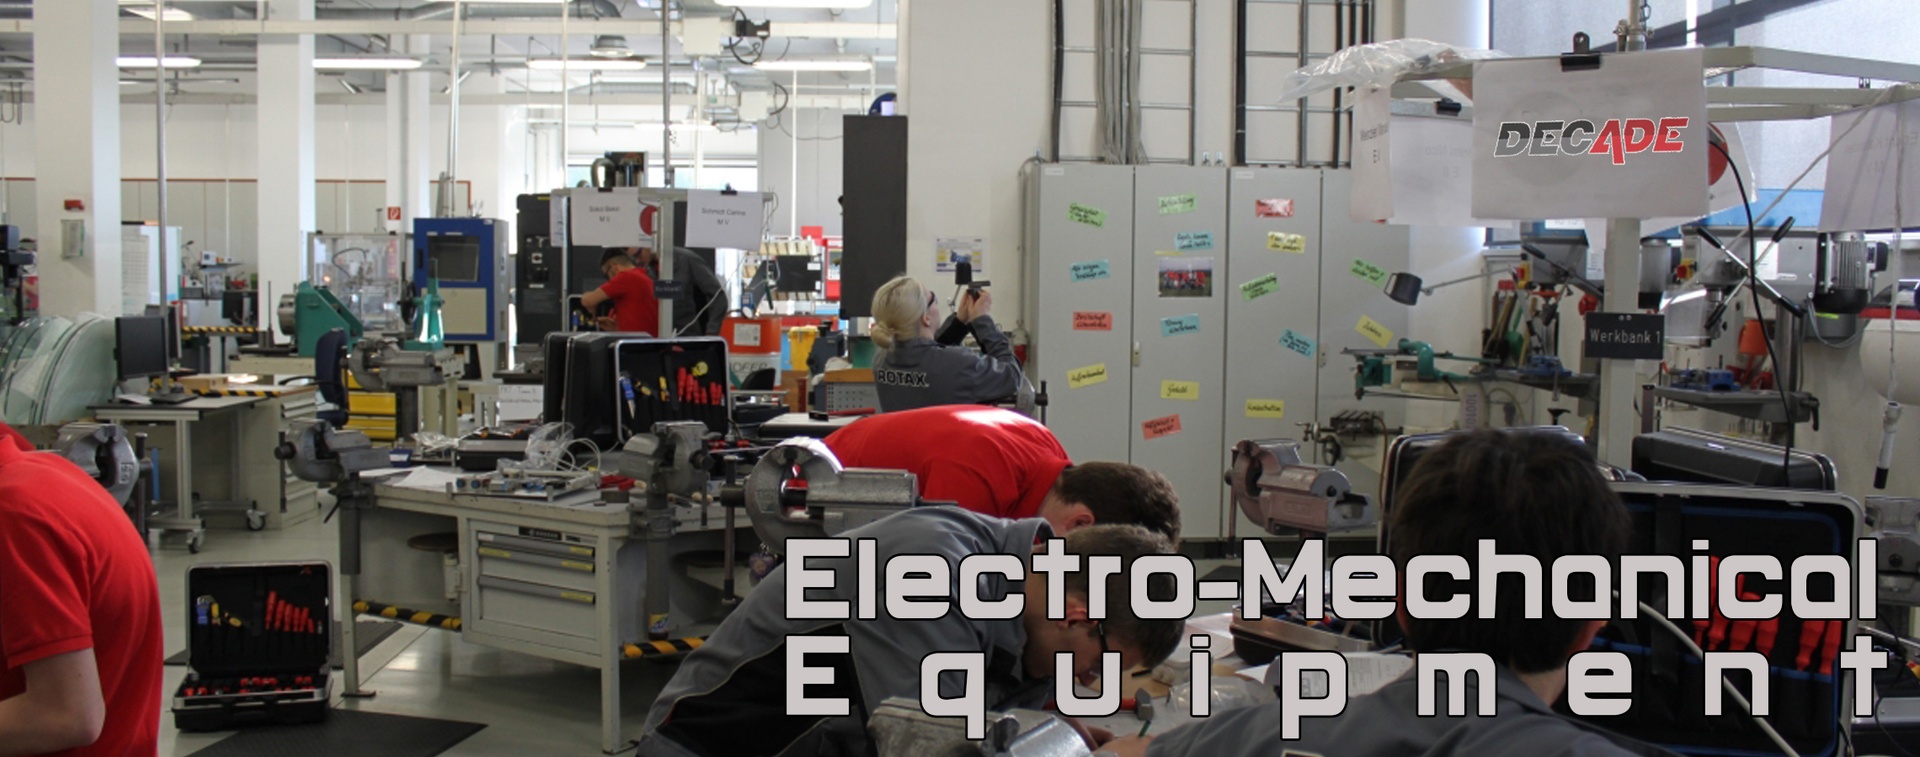 ALL / Electro-Mechanical Equipment’s